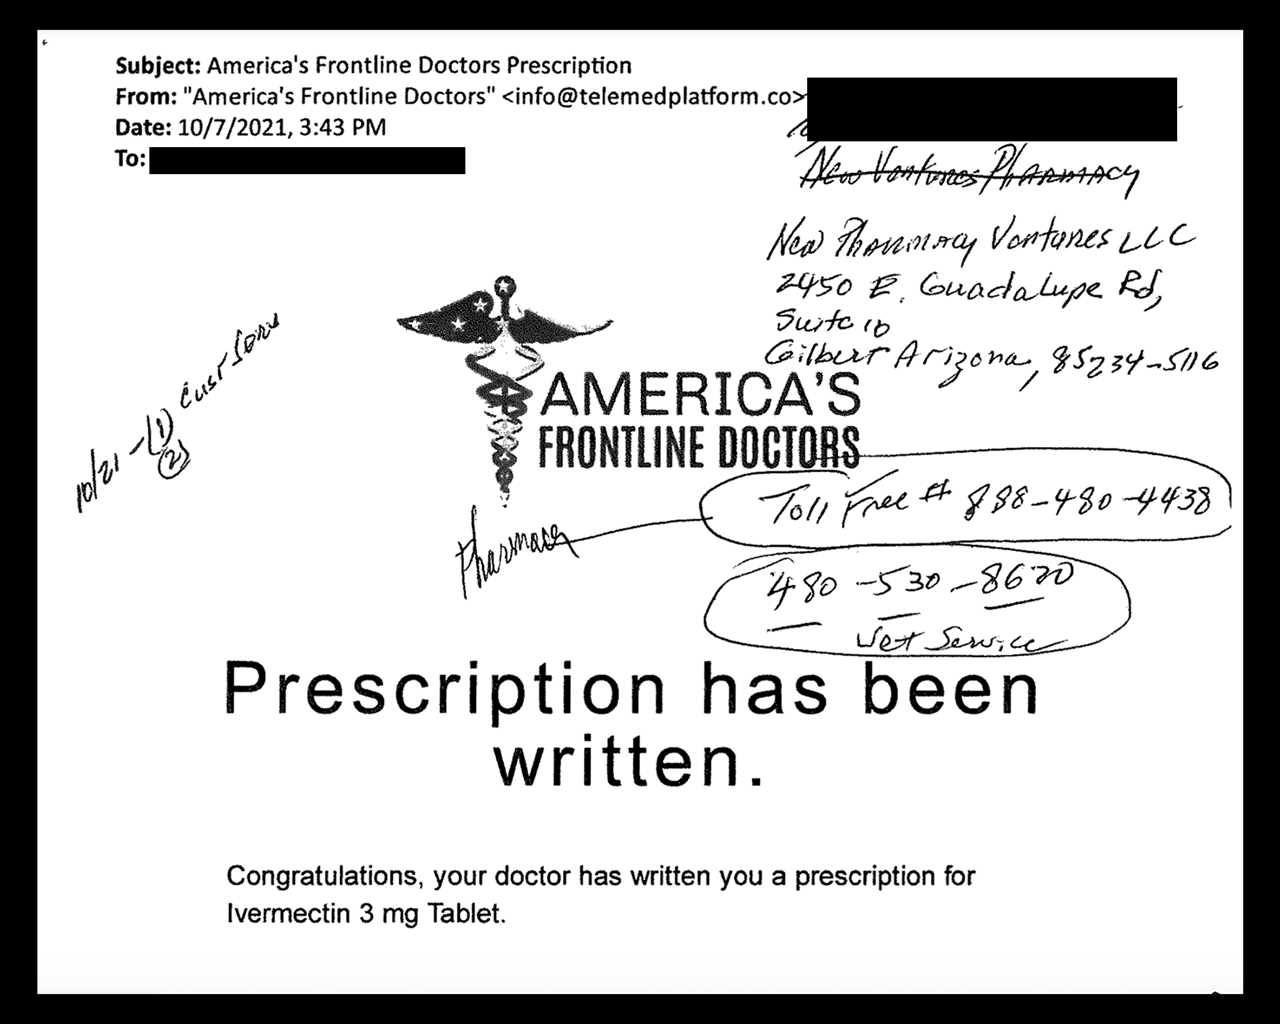 An email to Julie Moore's father confirming a prescription written by America's Frontline Doctors